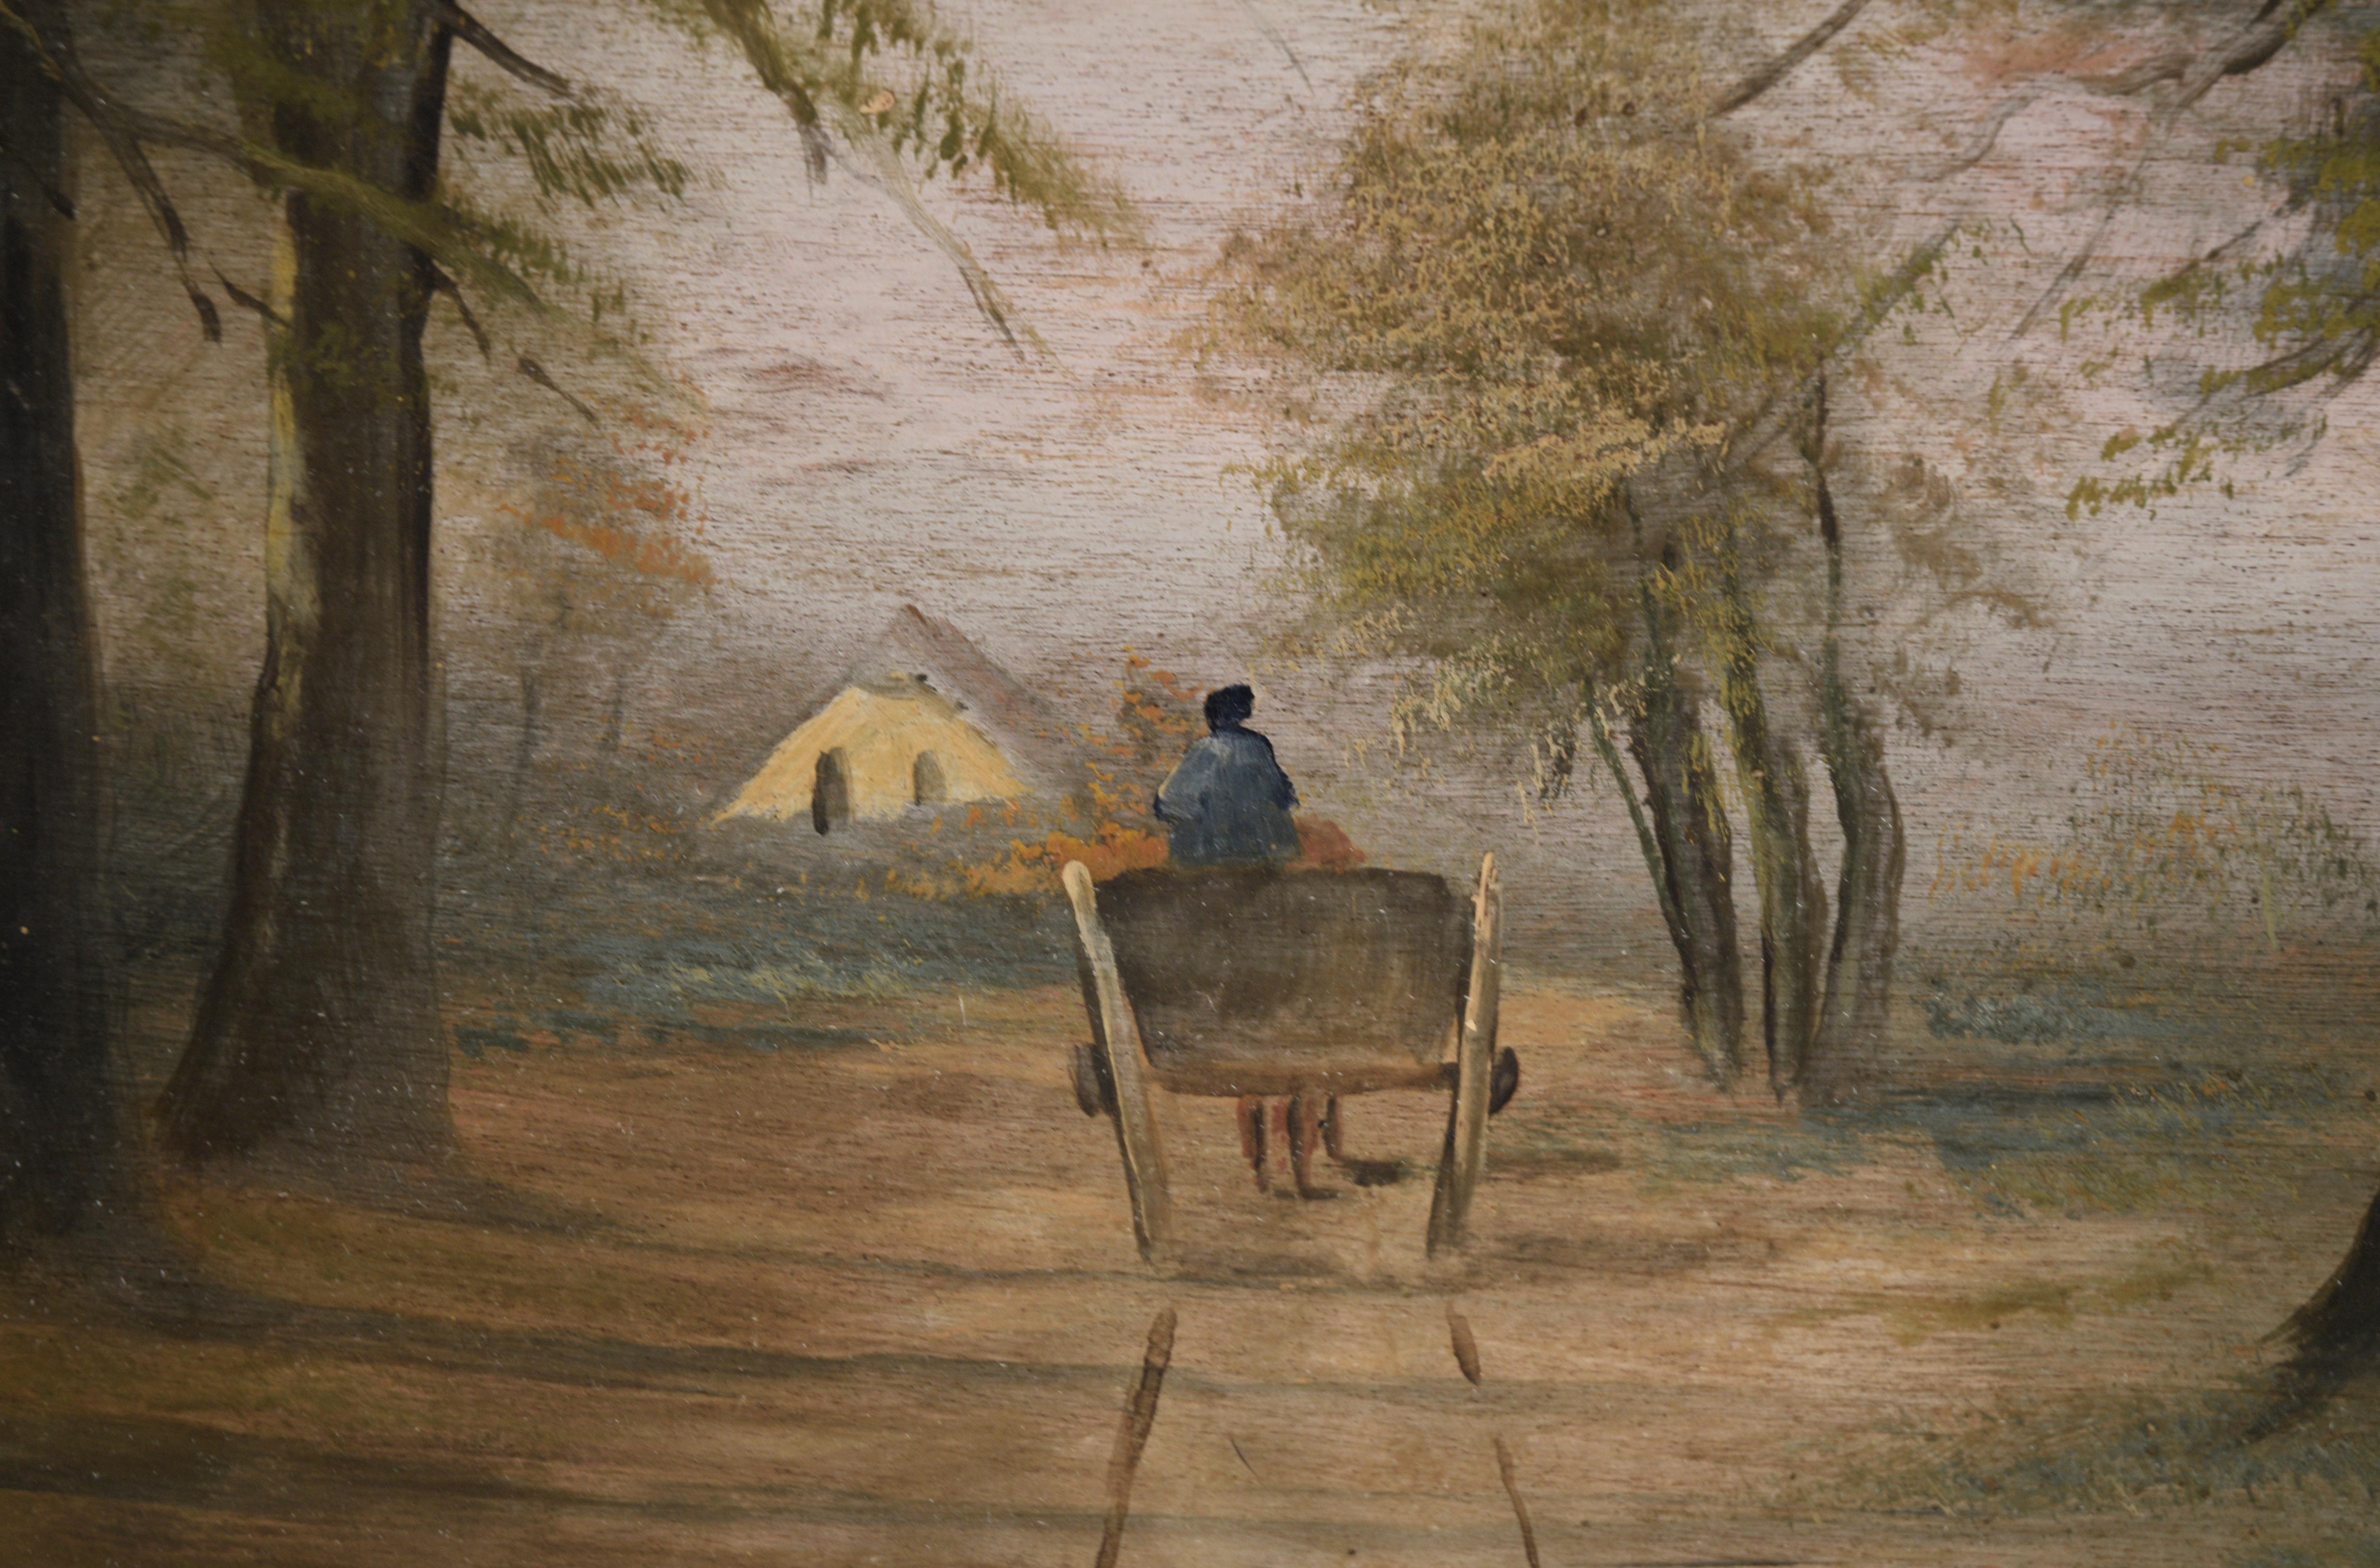 Horse Drawn Carriage in the Country Woods - Landscape in Oil on Wood Panel

Serene wooded landscape with a horse drawn carriage by an unknown artist. A cart with a horse and driver is facing away from the viewer, heading down a wooded path towards a